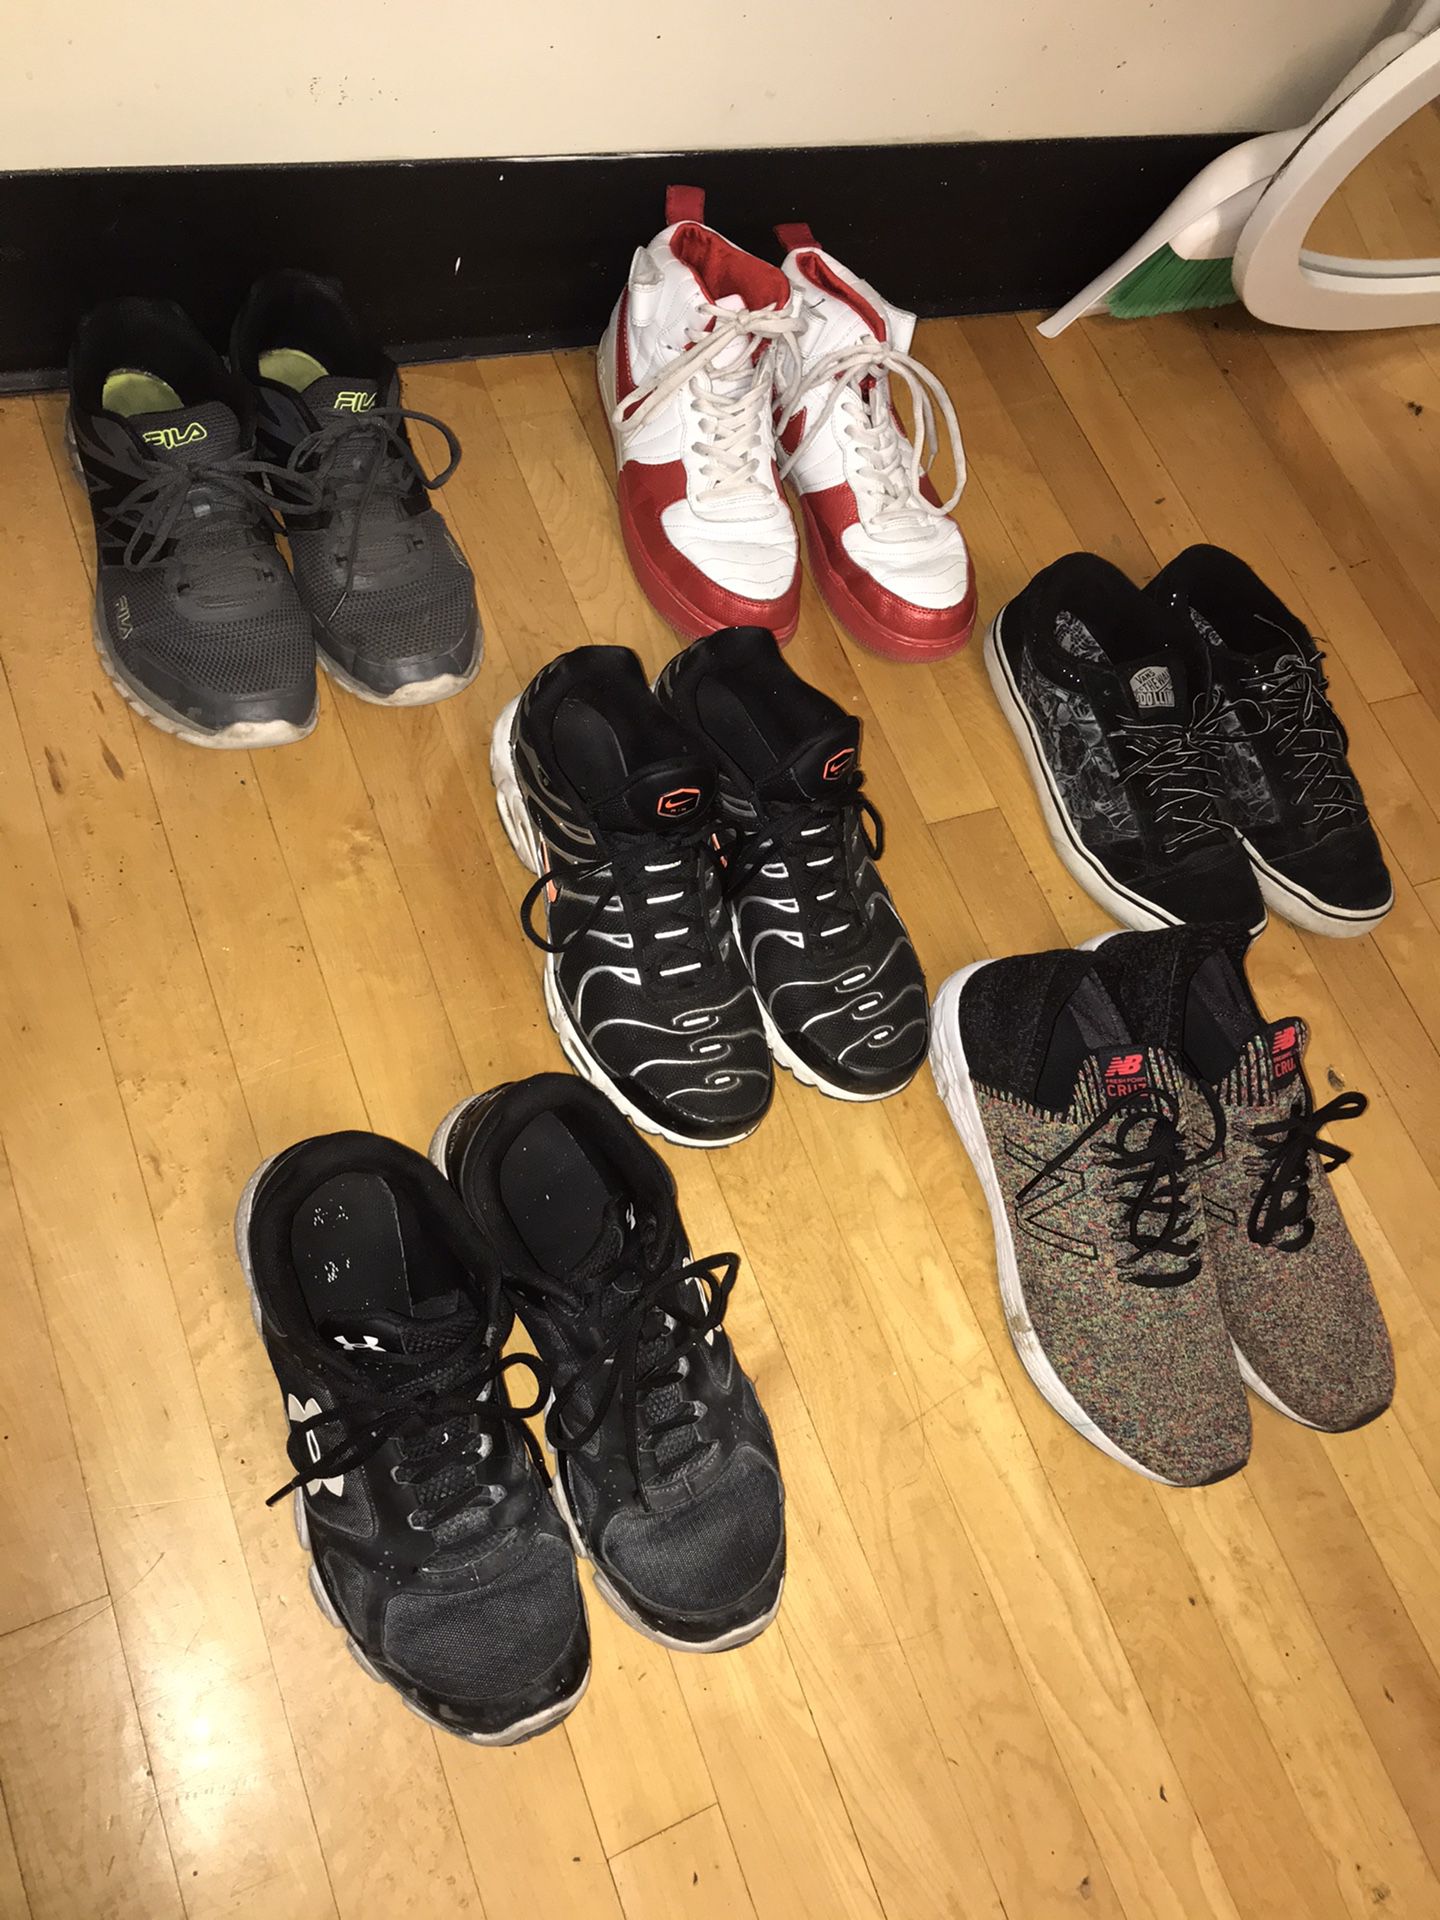 6 Pairs of Men’s Shoes - Sizes 9.5, 10, 10.5, 13